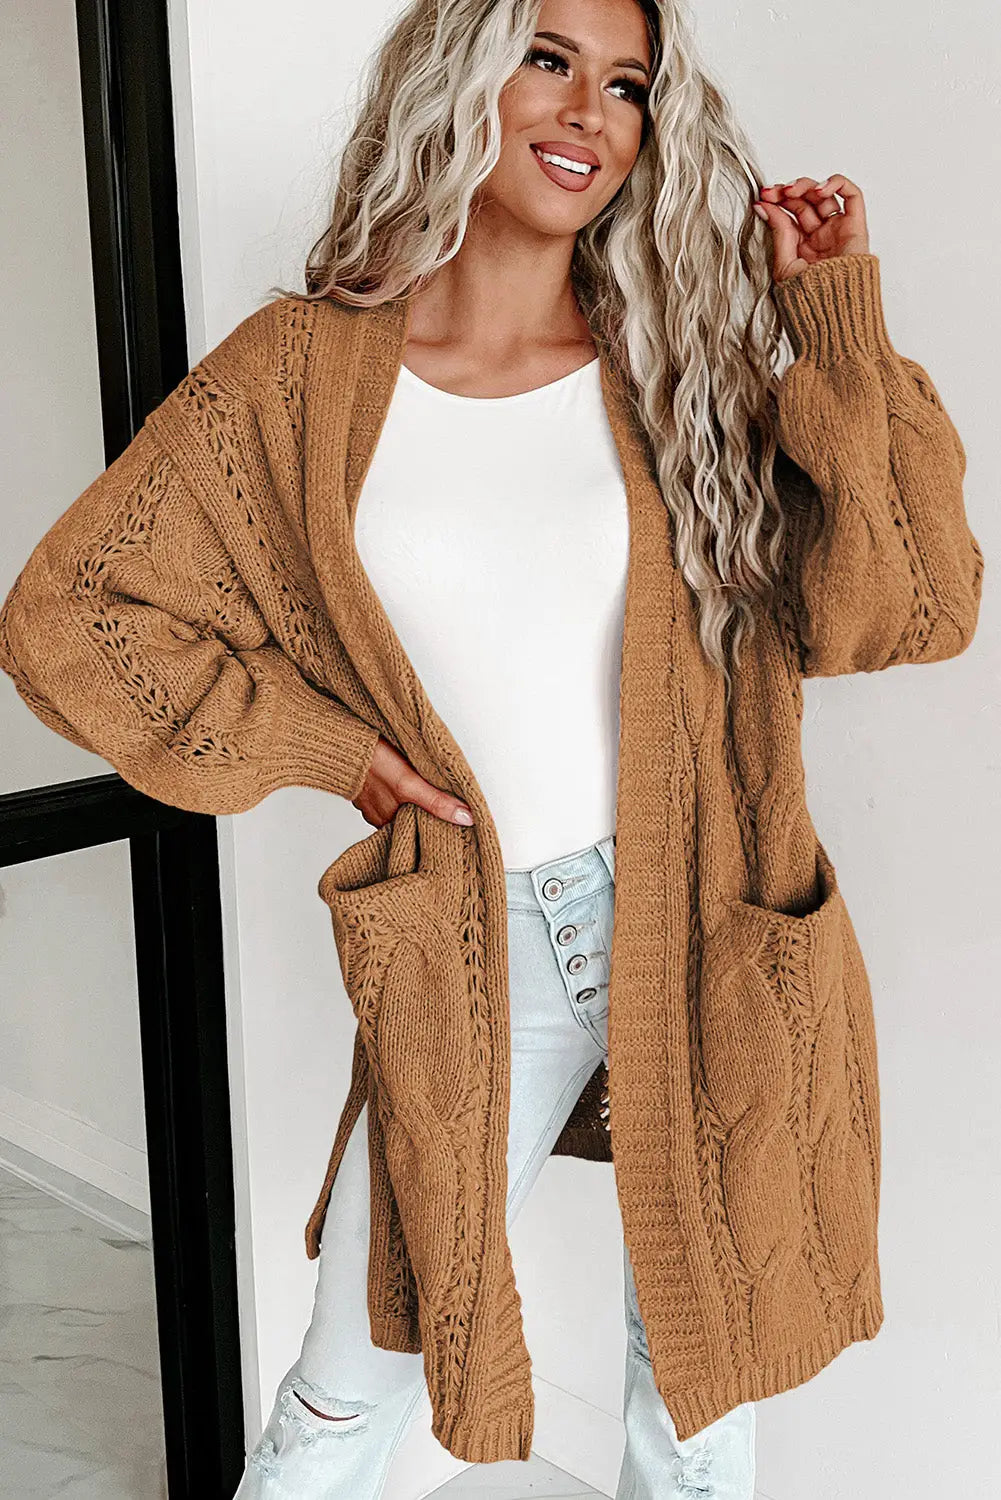 Apricot ribbed trim eyelet cable knit cardigan - tops